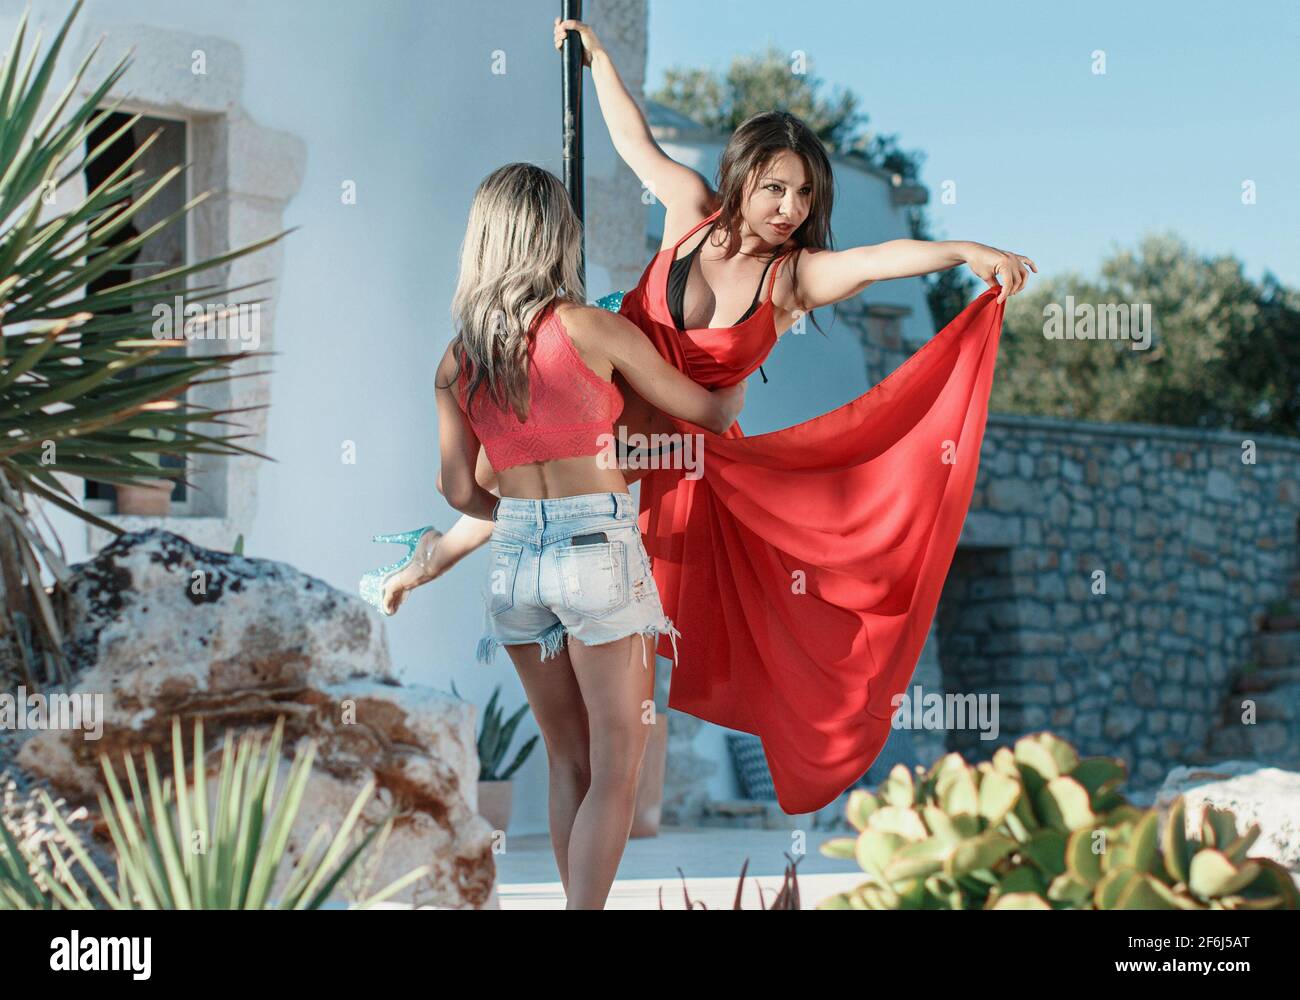 Instructor helping Young pole dancer in a dress to take a pose on a portable platform against the garden Stock Photo